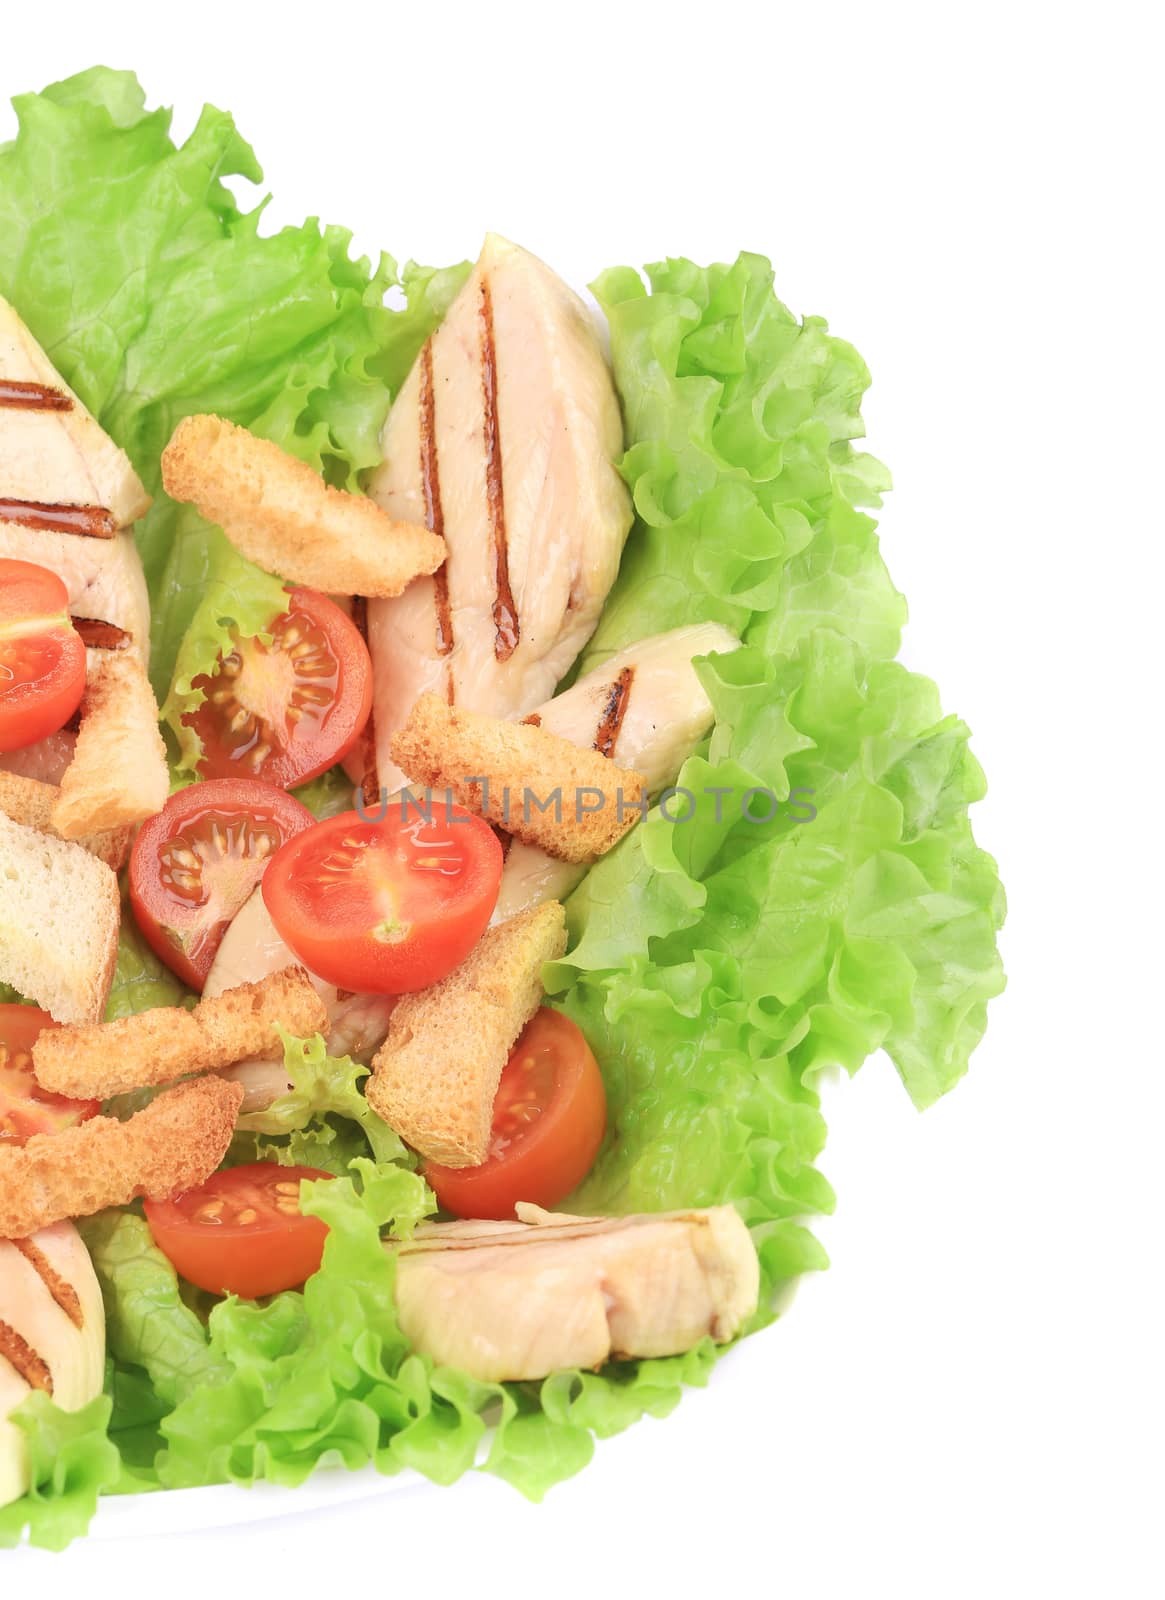 Caesar salad with tomatoes cherry. Isolated on a white background.